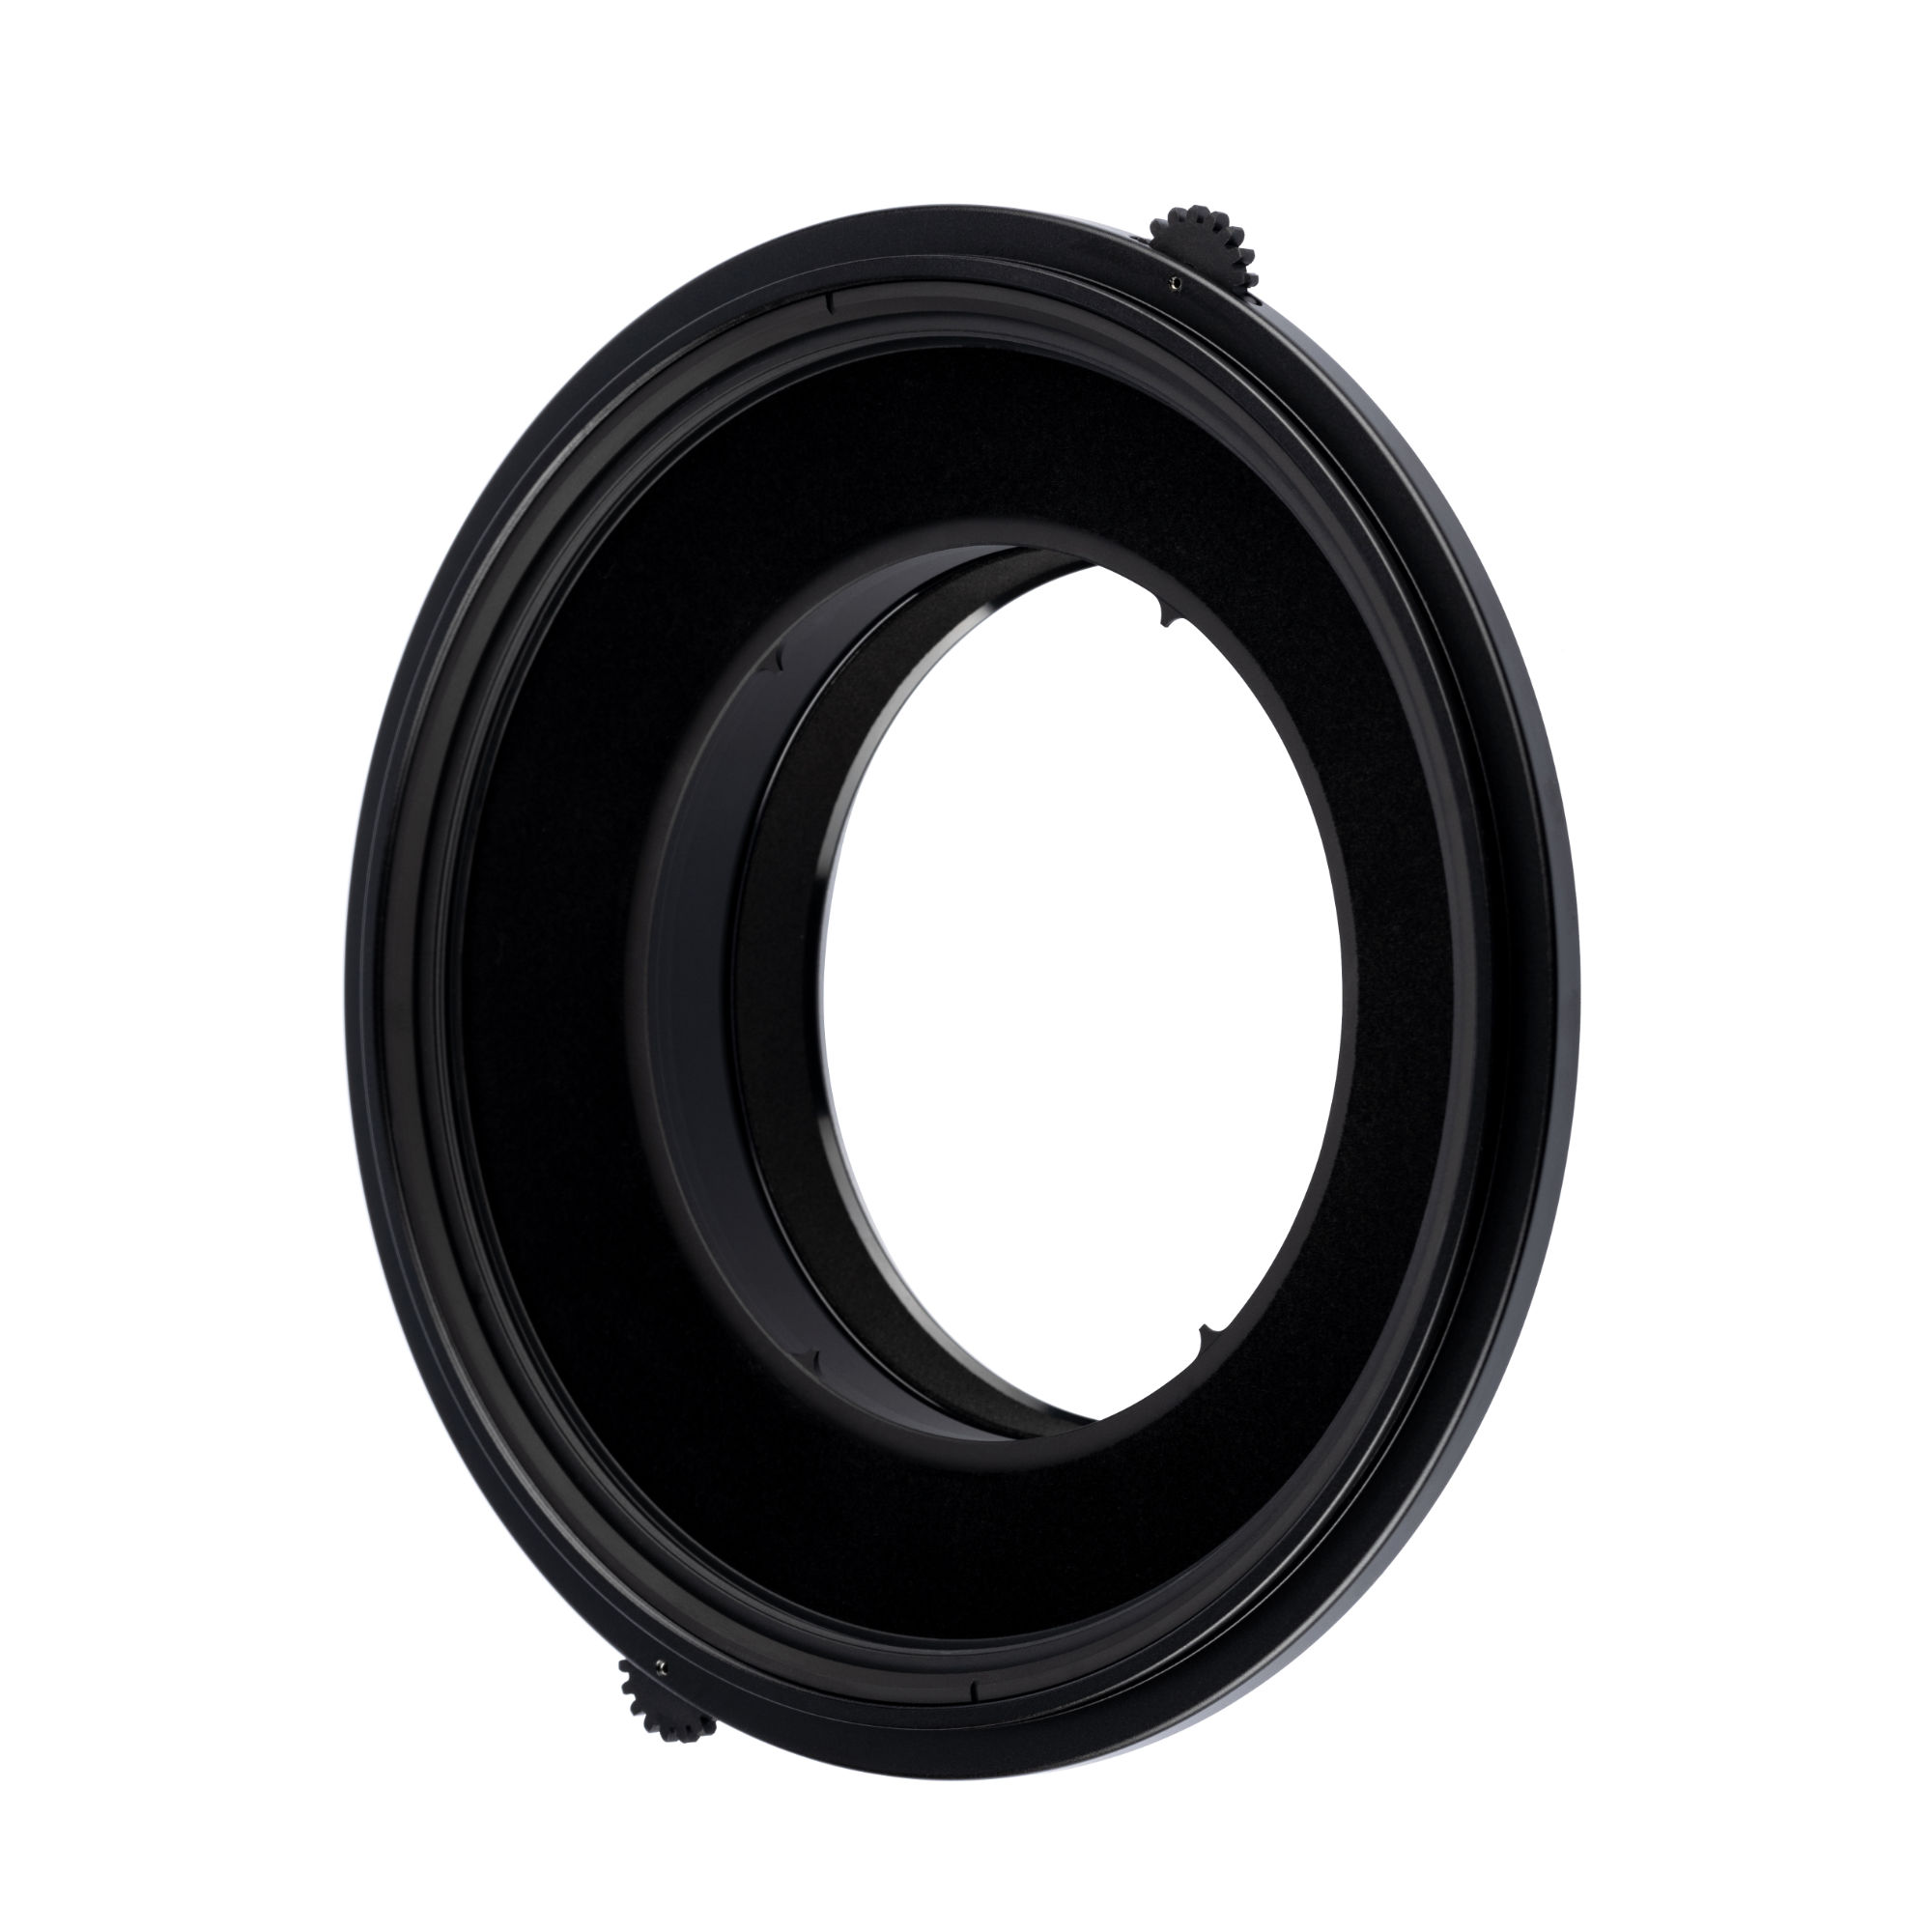 NiSi S6 ALPHA 150mm Filter Holder and Case for Canon RF 10-20mm f